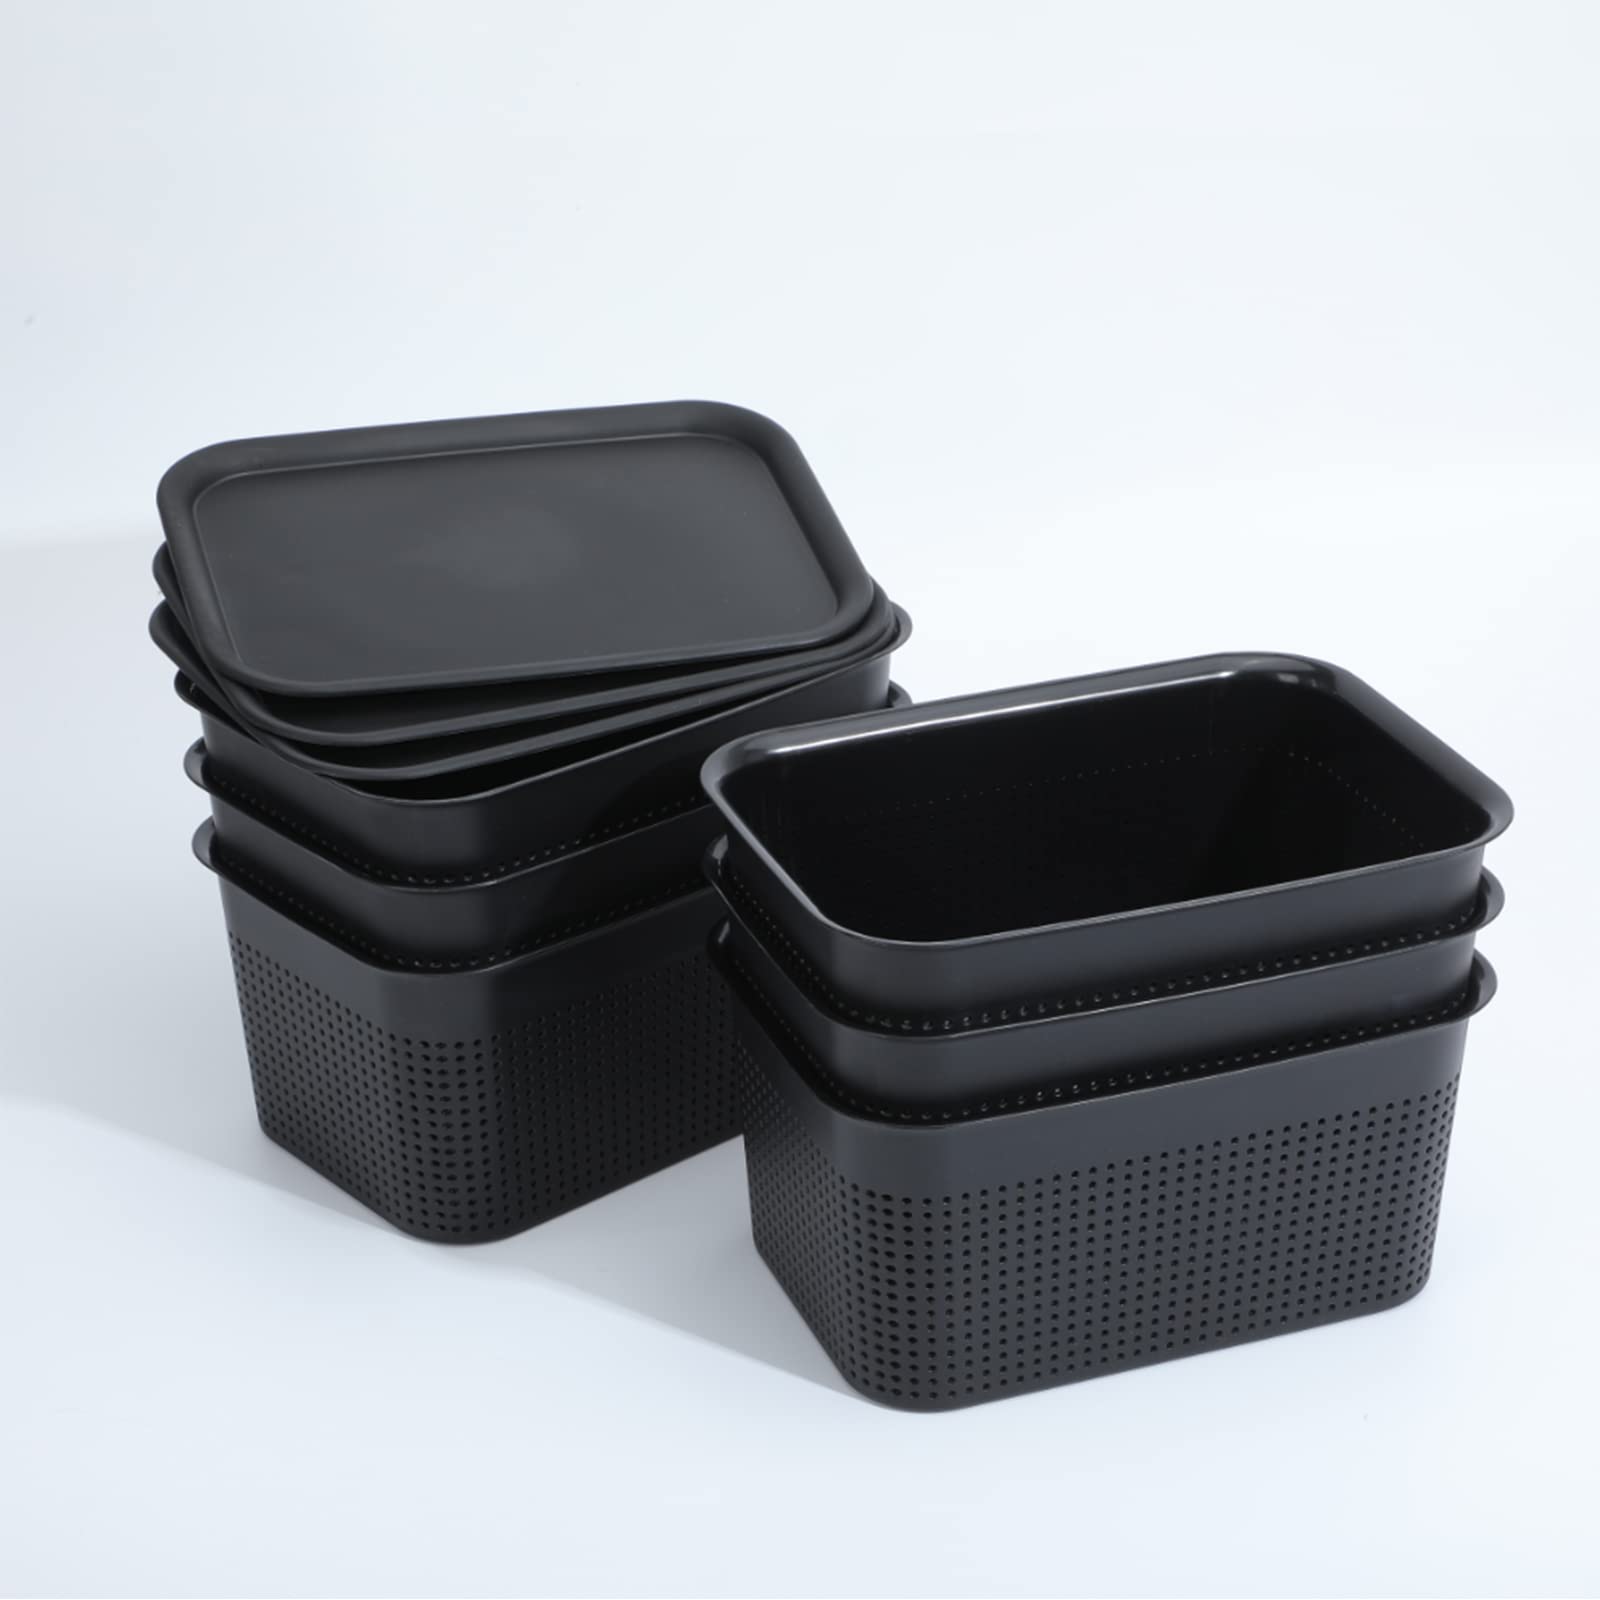 KoTuosy Plastic Storage Baskets with Lids Baskets for Organizing Organizer Bins 6.8 Qt Stackable Storage Bins with Lids Tiny Holes, Storage Containers, Plastic Bins with Handle